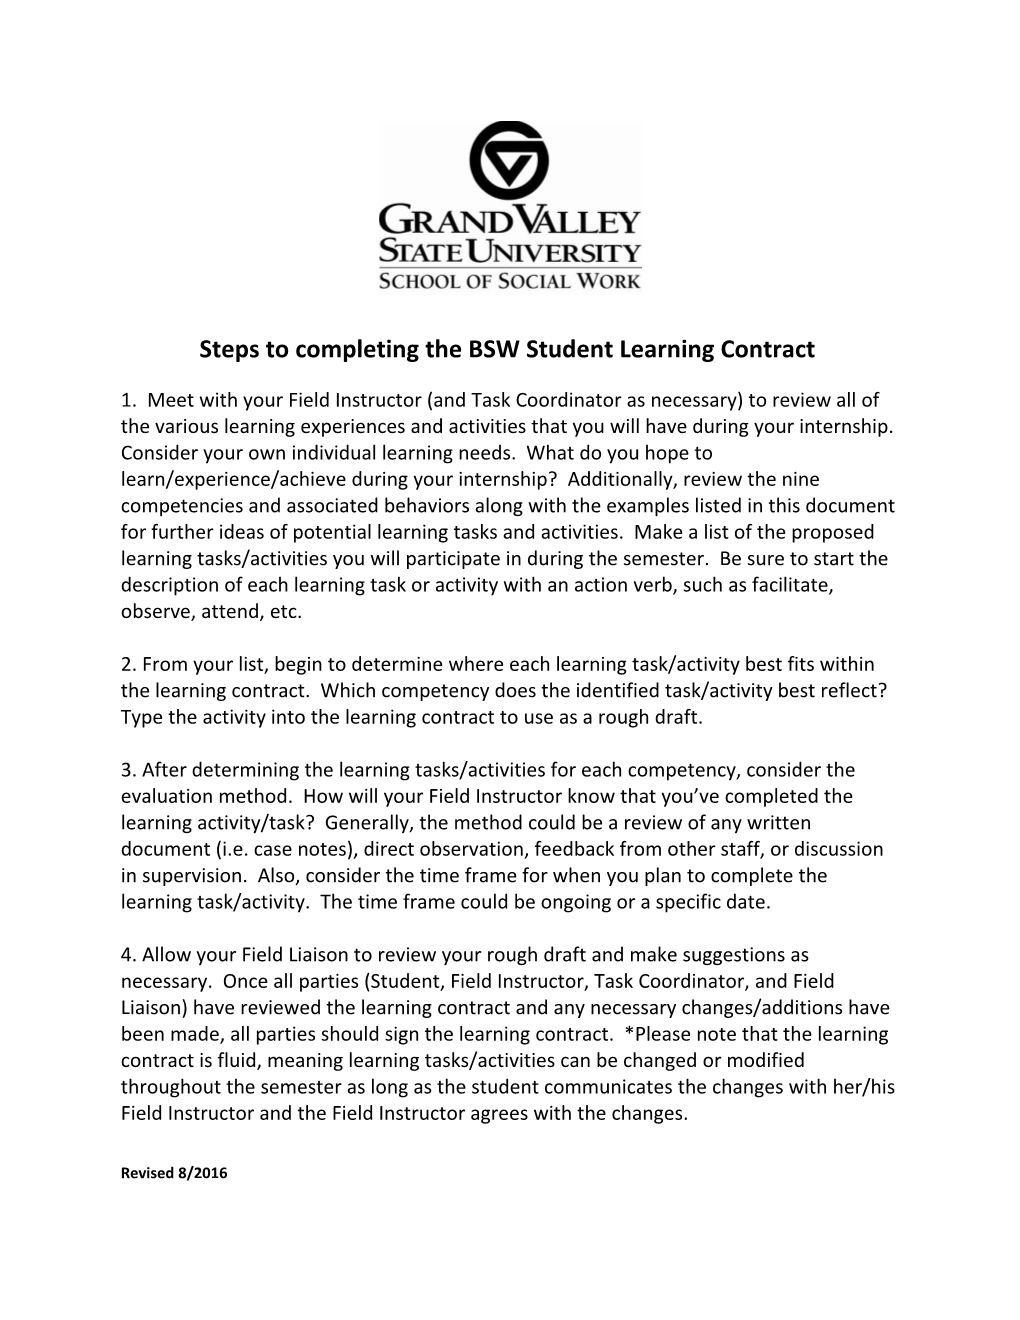 Steps to Completing the BSW Student Learning Contract